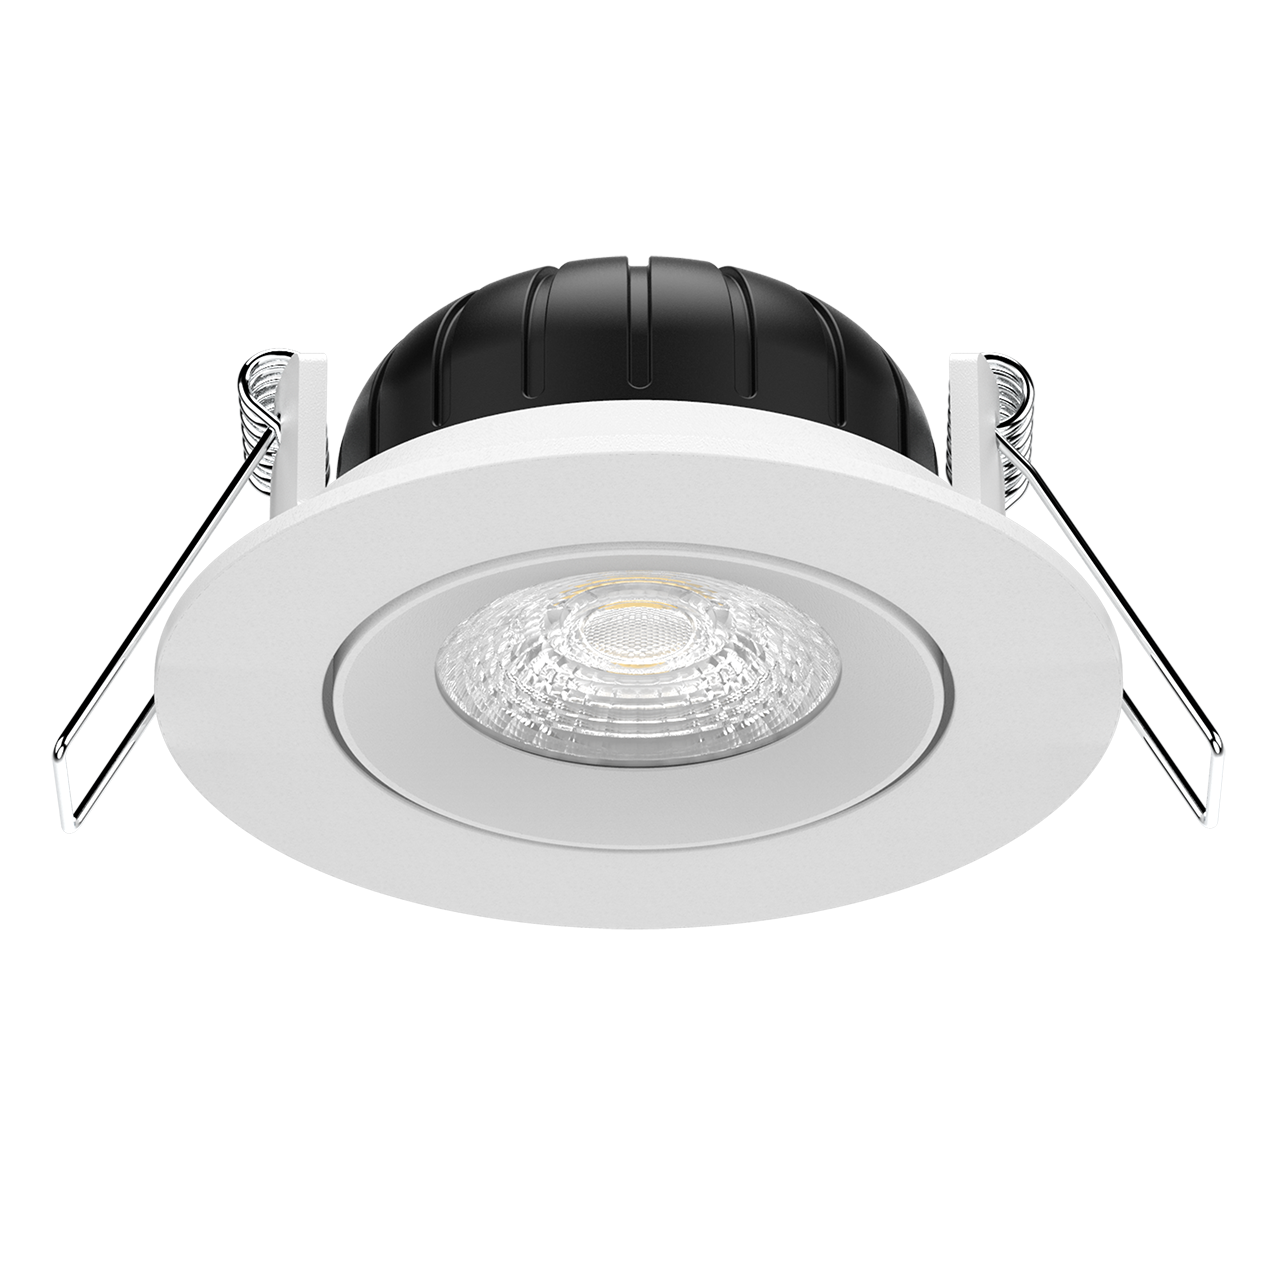 Hot New Products Anti Glare Cob Led Downlight - New CRI 95 Dim to warm changeable 7W LED Downlight – Radiant Lighting